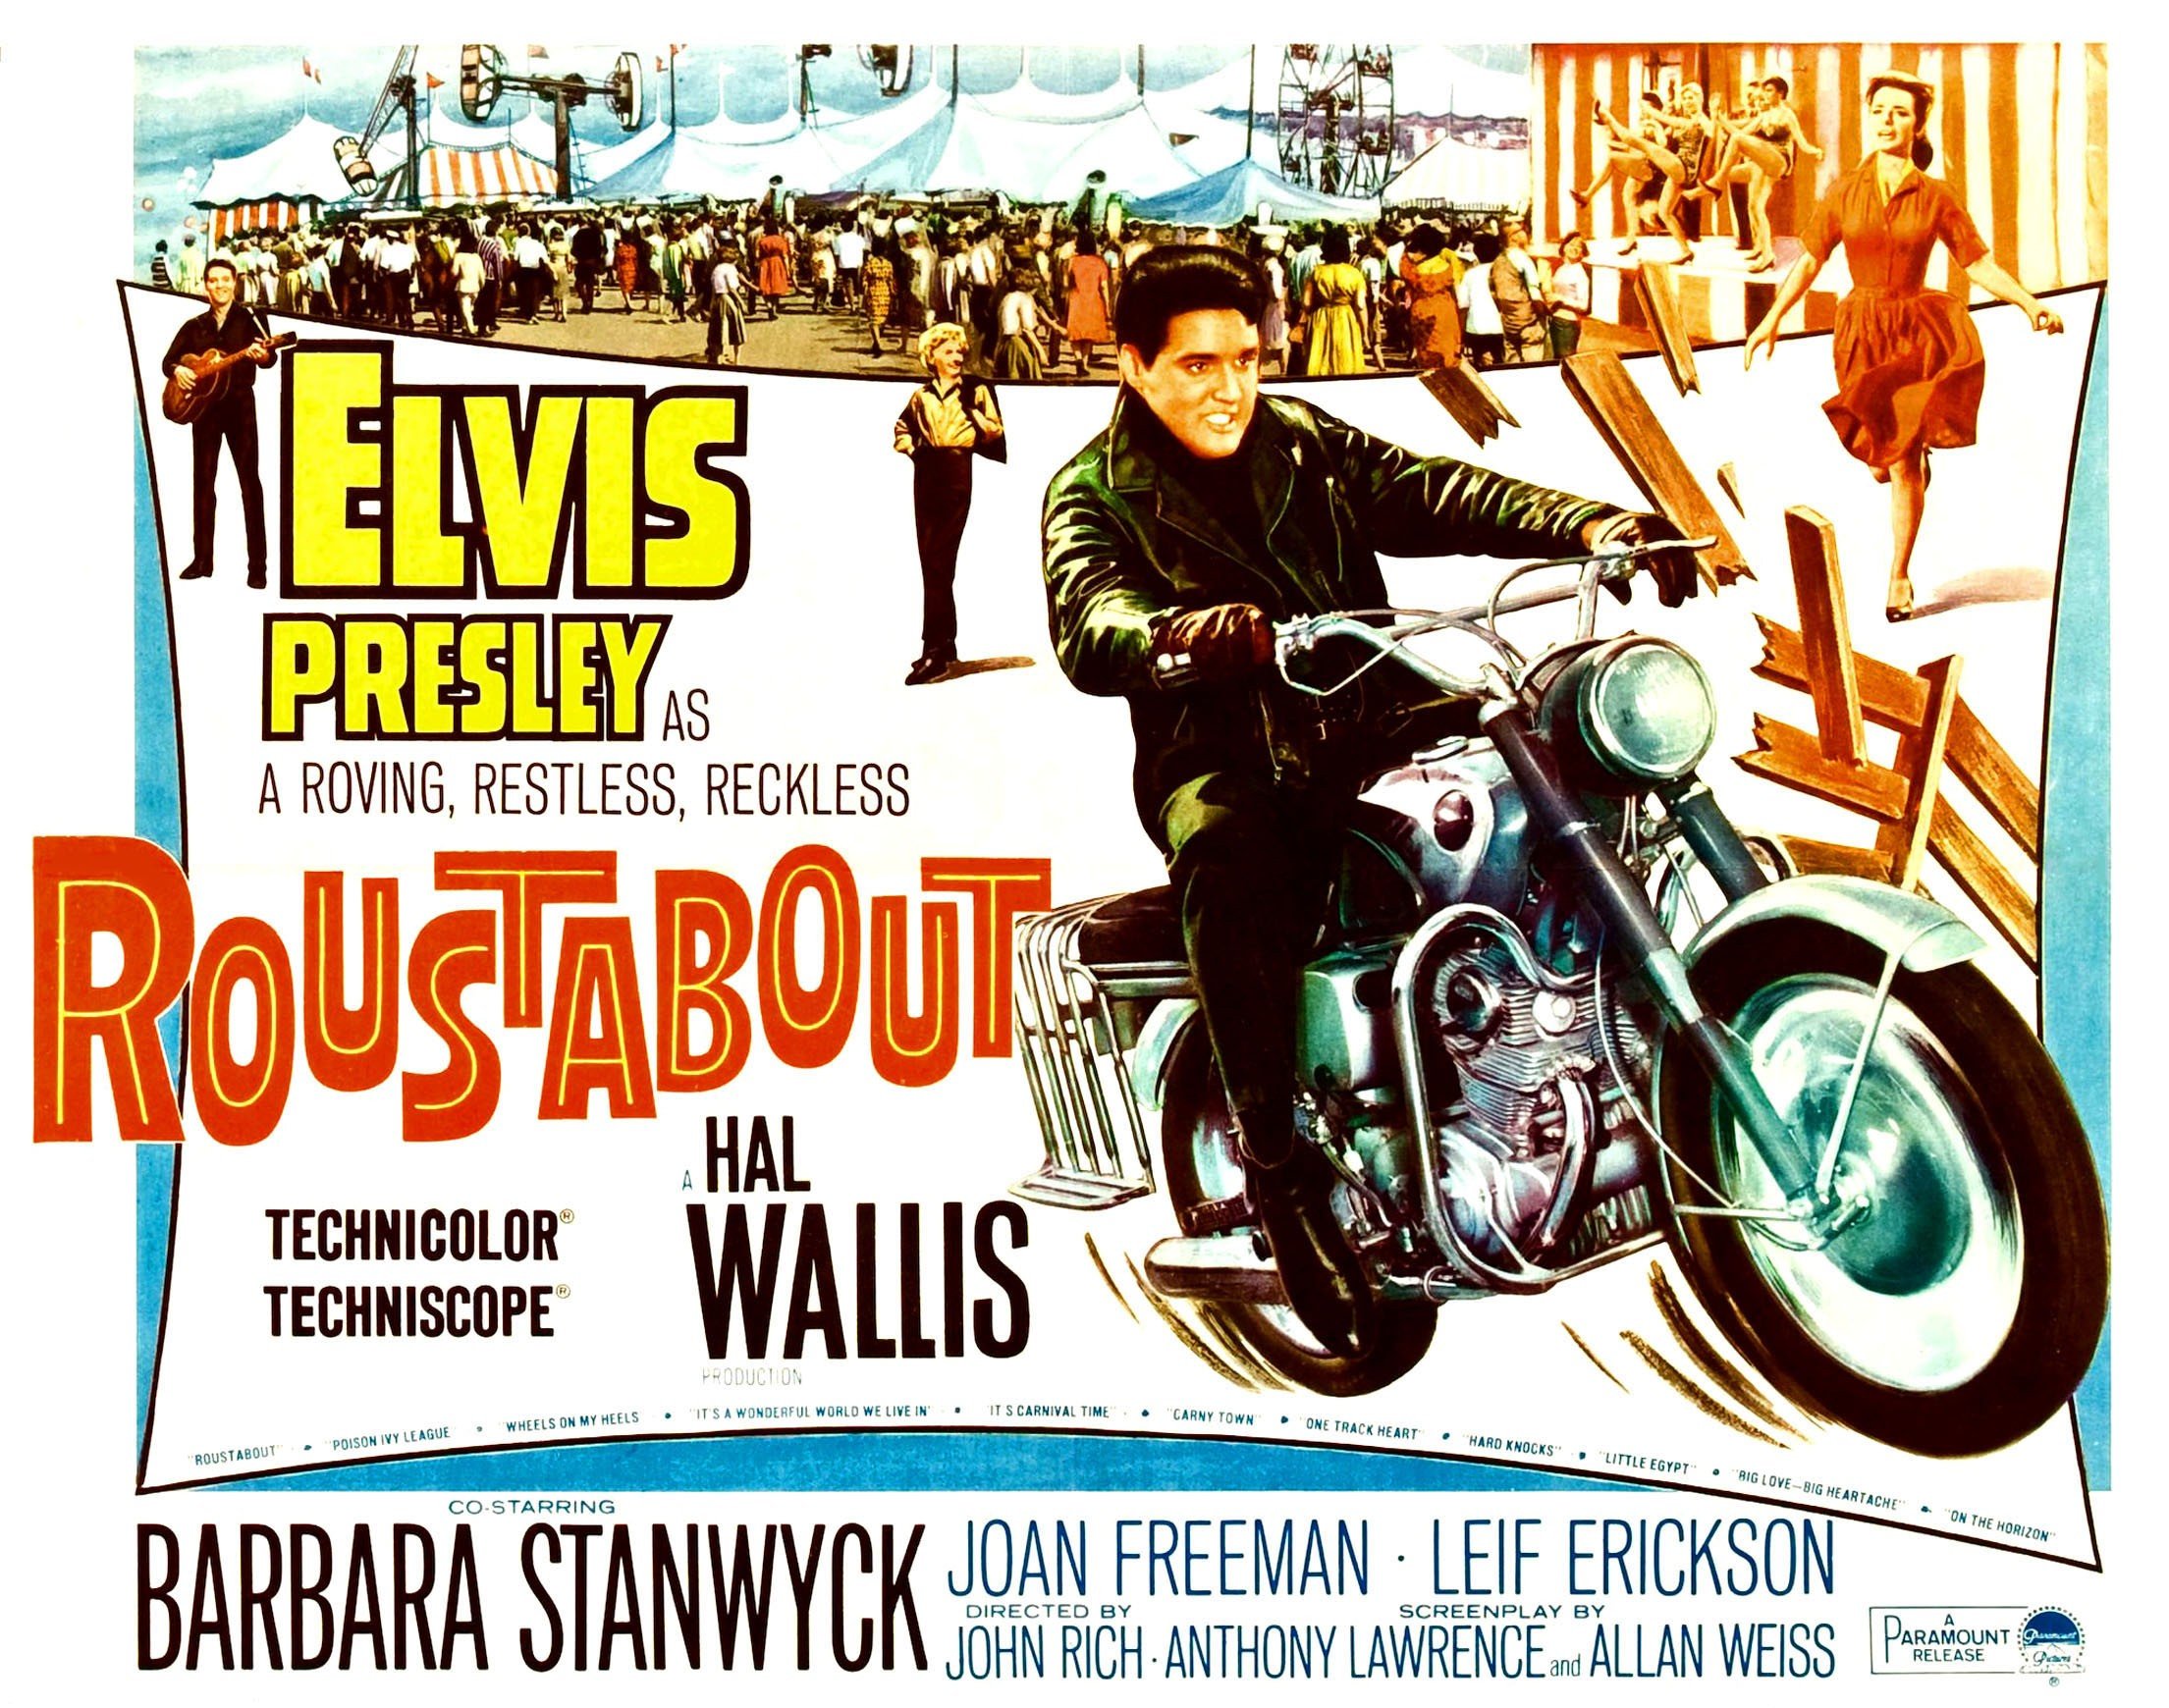 Elvis Presley riding a motorcycle on a poster for the movie 'Roustabout'